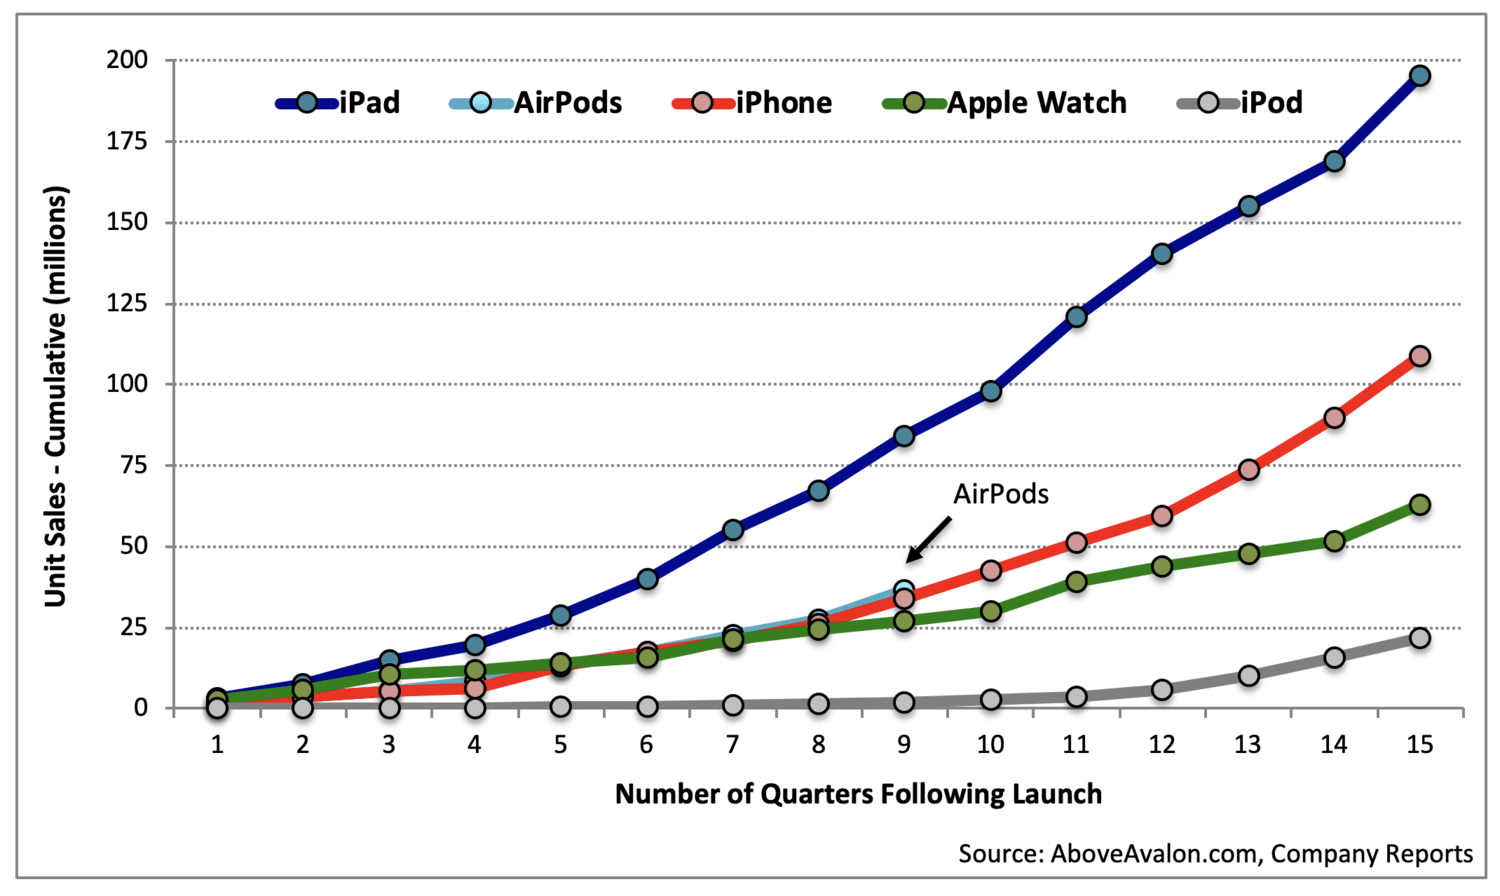 Cumulative sales of Apple products in their first two years of availability